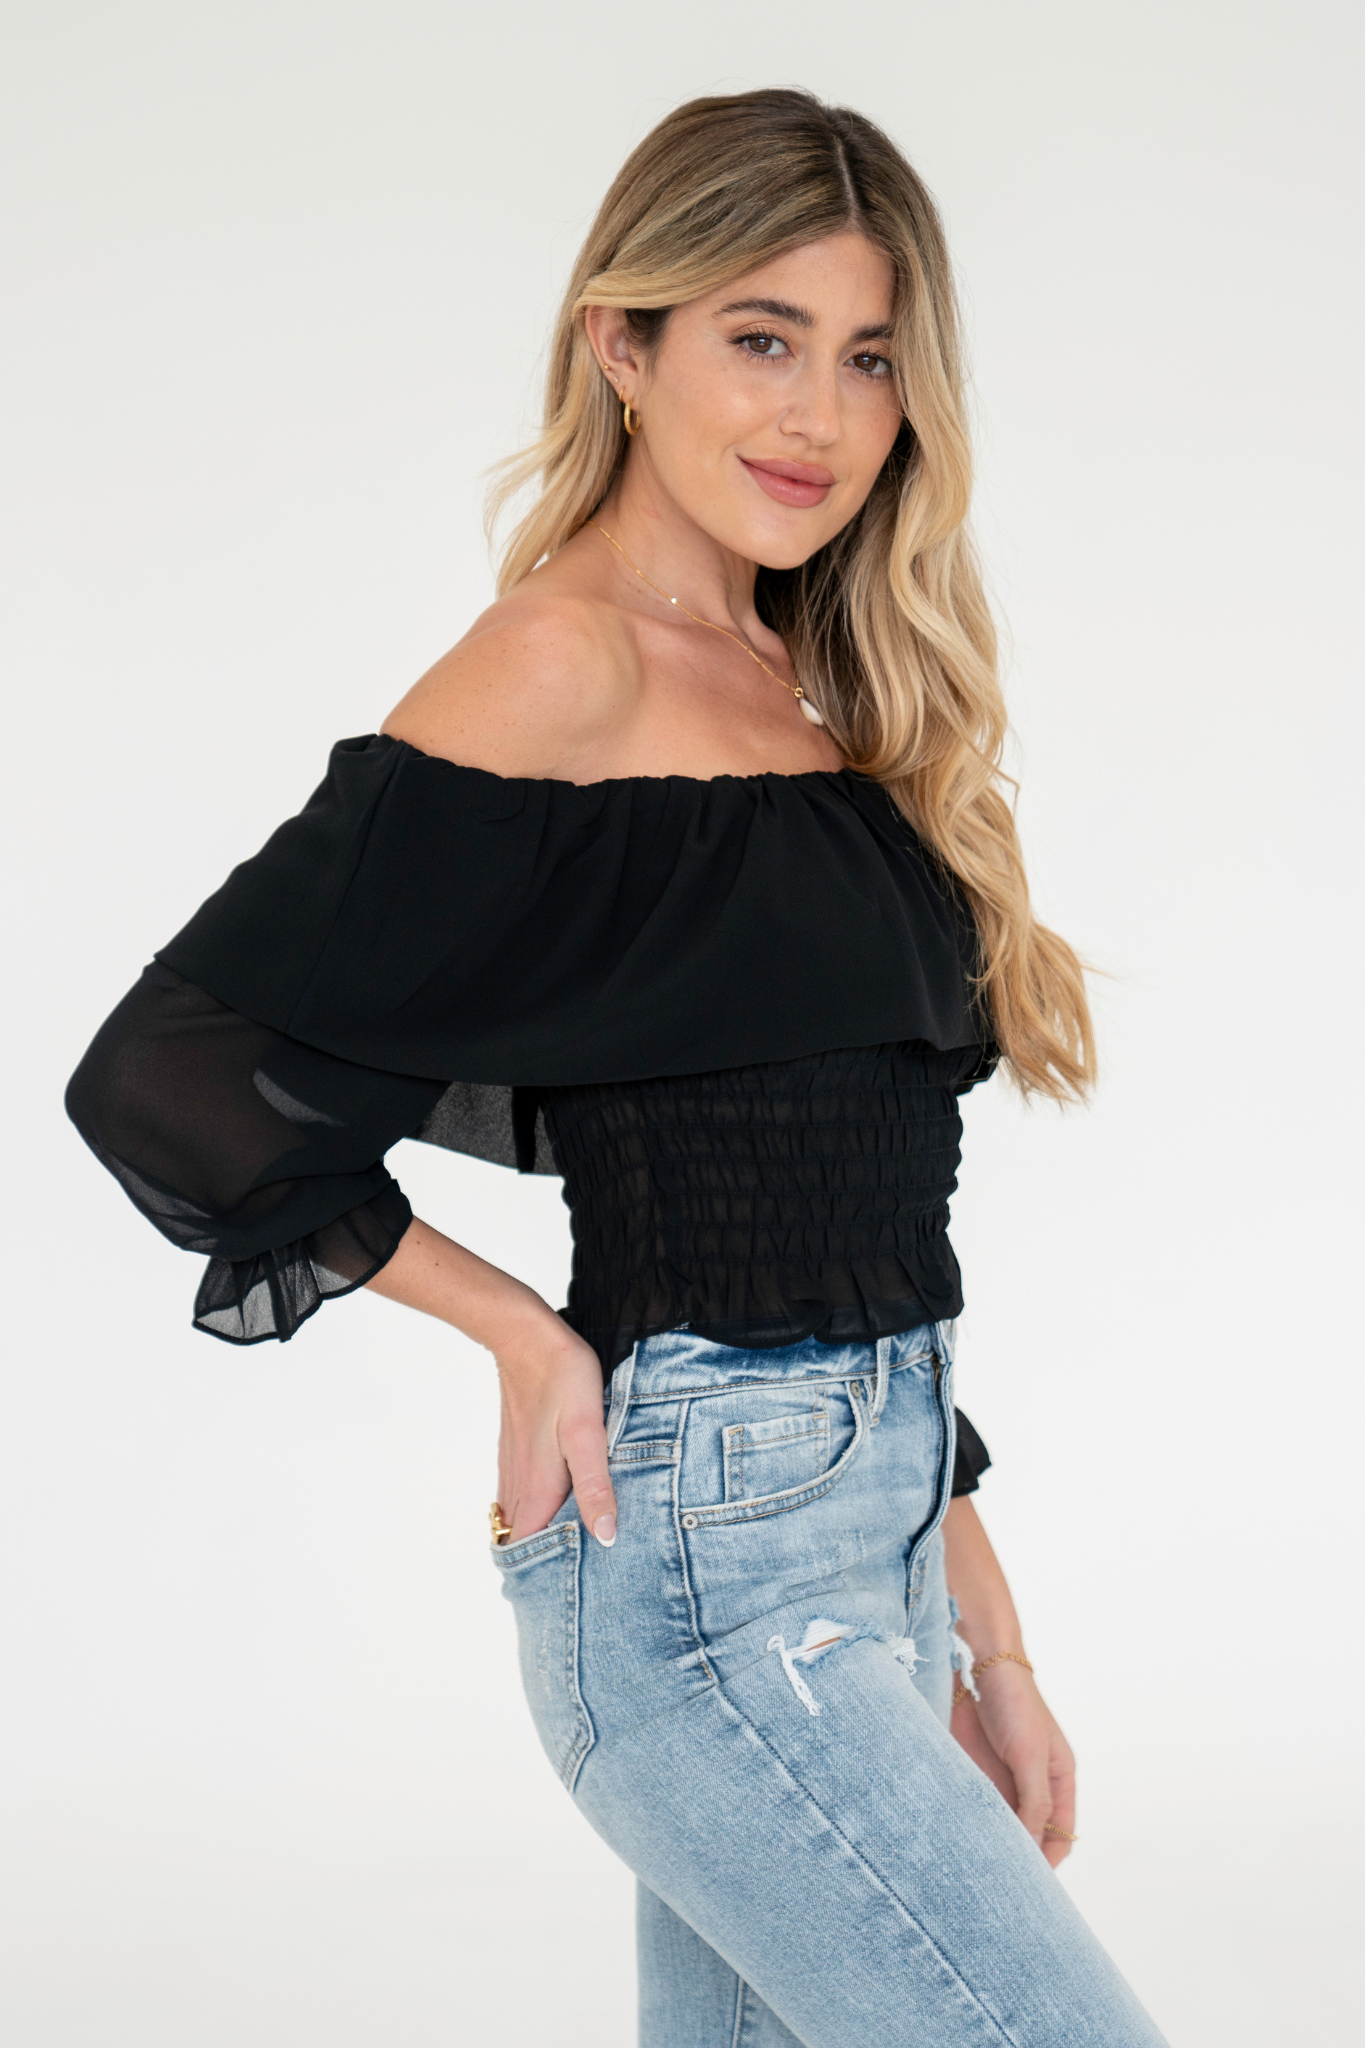 View 1 of Boa Off Shoulder Top, a Tops from Larrea Cove. Detail: Bring a timeless, romantic look to your wardrobe with the Boa Off Shoulder Top!...